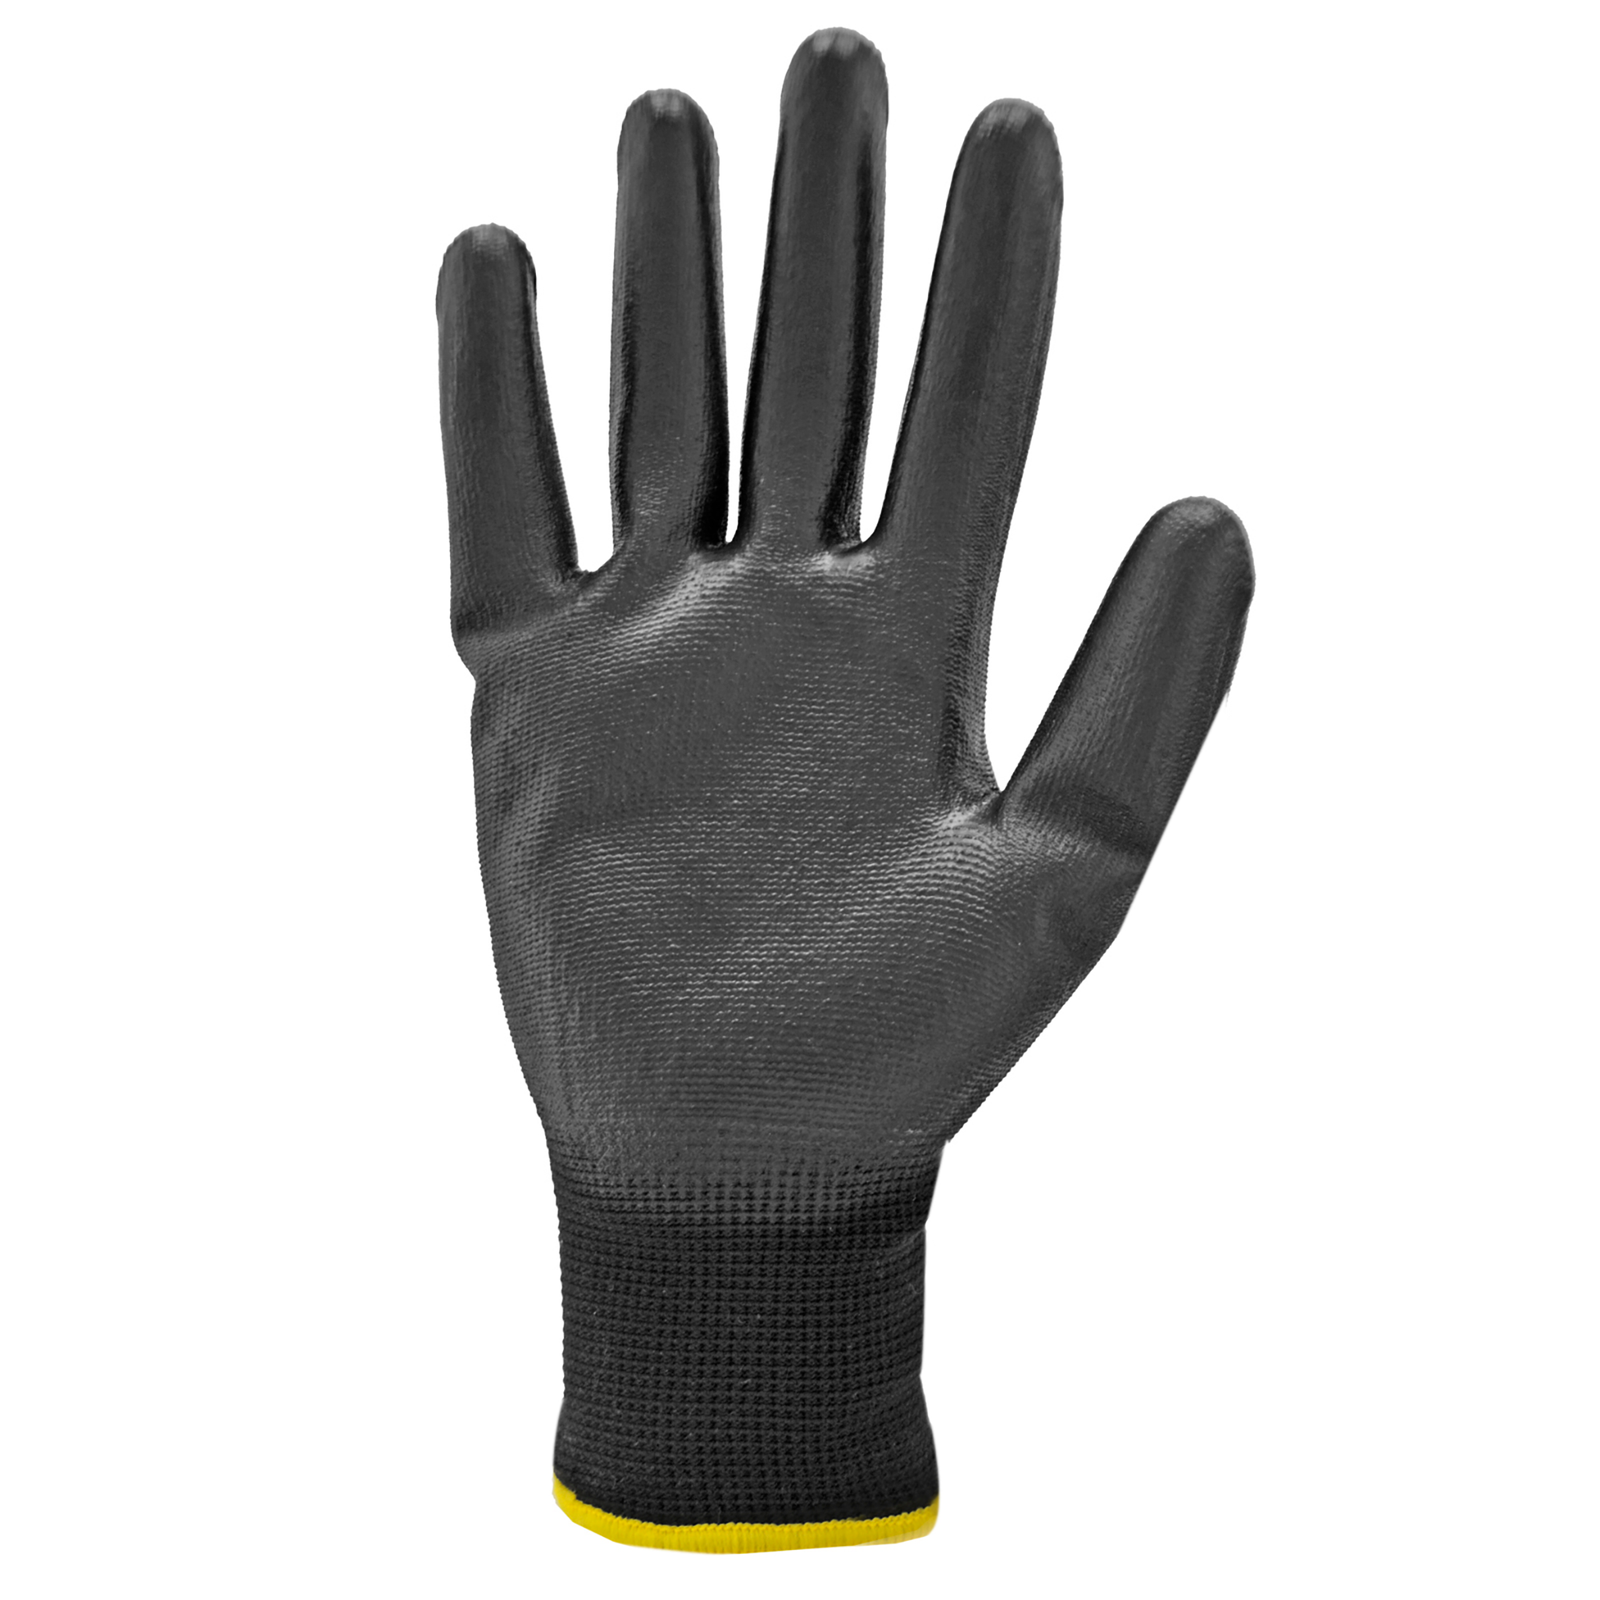 Palm of a black thin safety work glove with polyurethane dipped palms